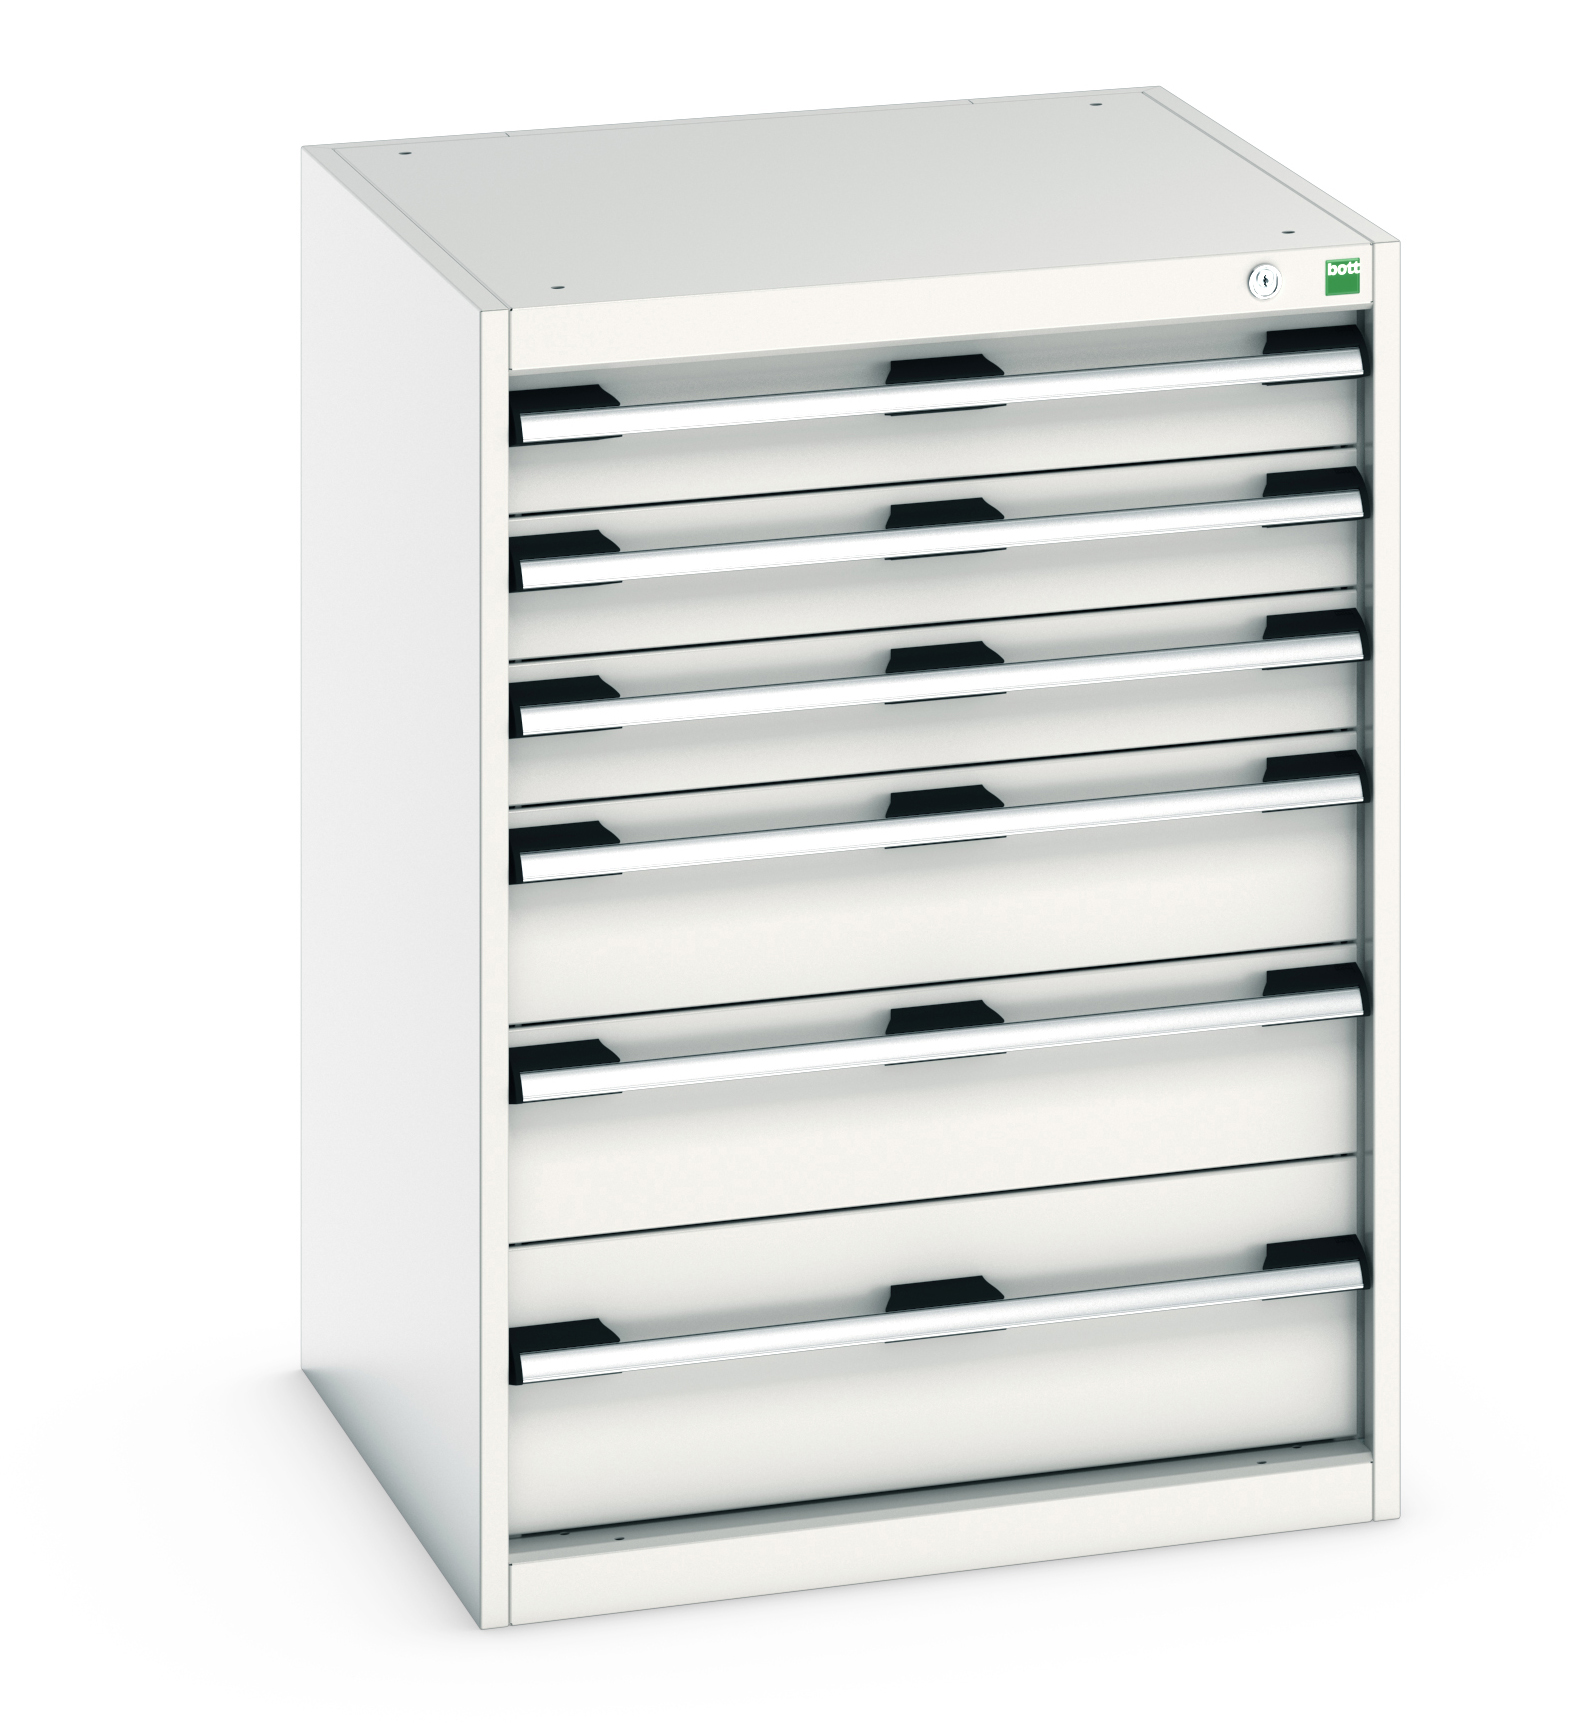 Bott Cubio Drawer Cabinet With 6 Drawers - 40019049.16V